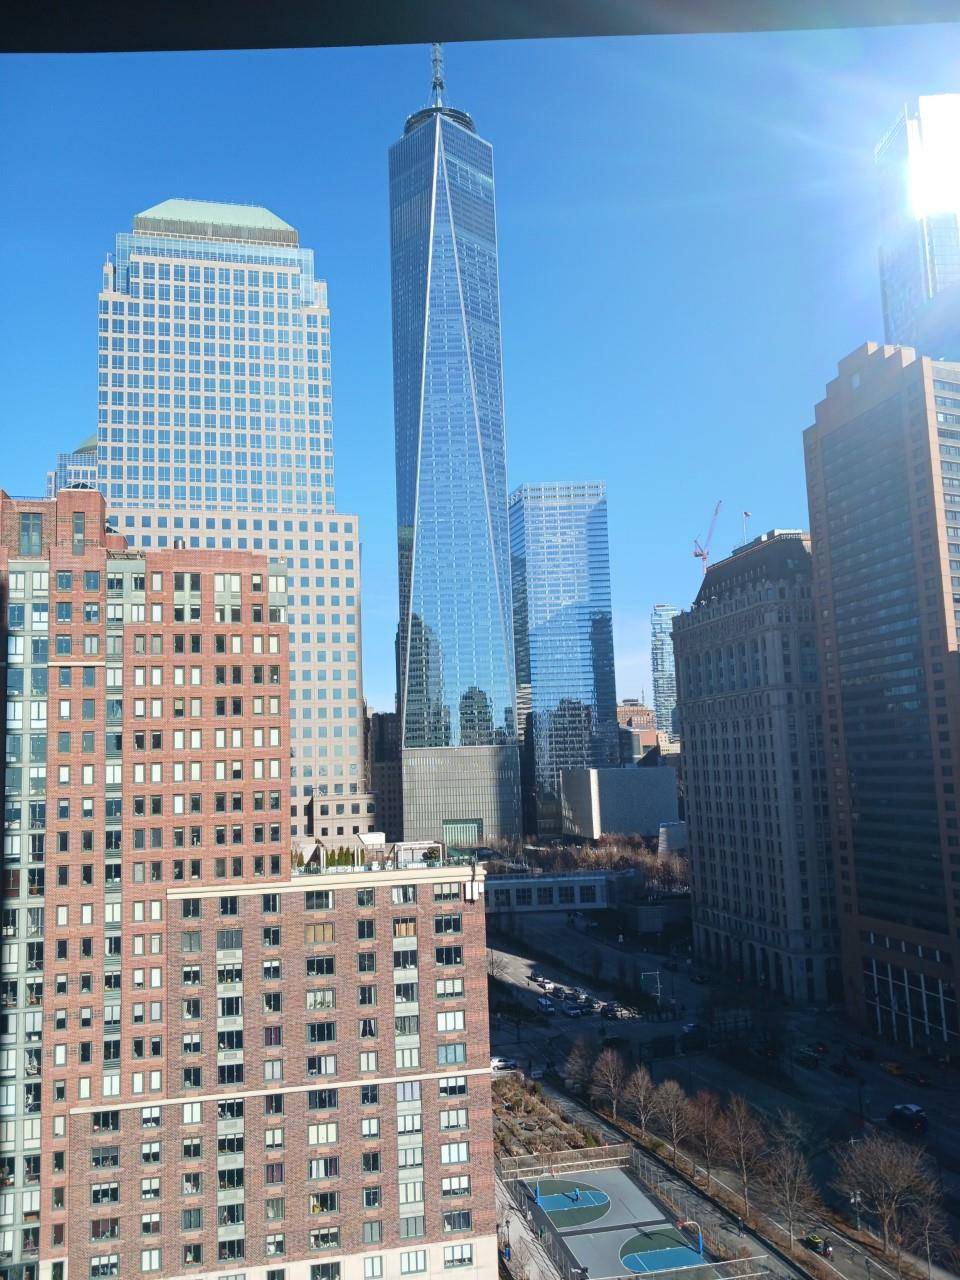 BROKERS AGENTS PLEASE COLLECT YOUR OWN FEELOVELY ONE BEDROOM WITH HUGE BALCONY FACING NORTH, DIRECT VIEWS OF FREEDOM TOWER THE APARTMENT HAS A BRAND NEW KITCHEN, HARDWOOD FLOORS LOTS OF ...